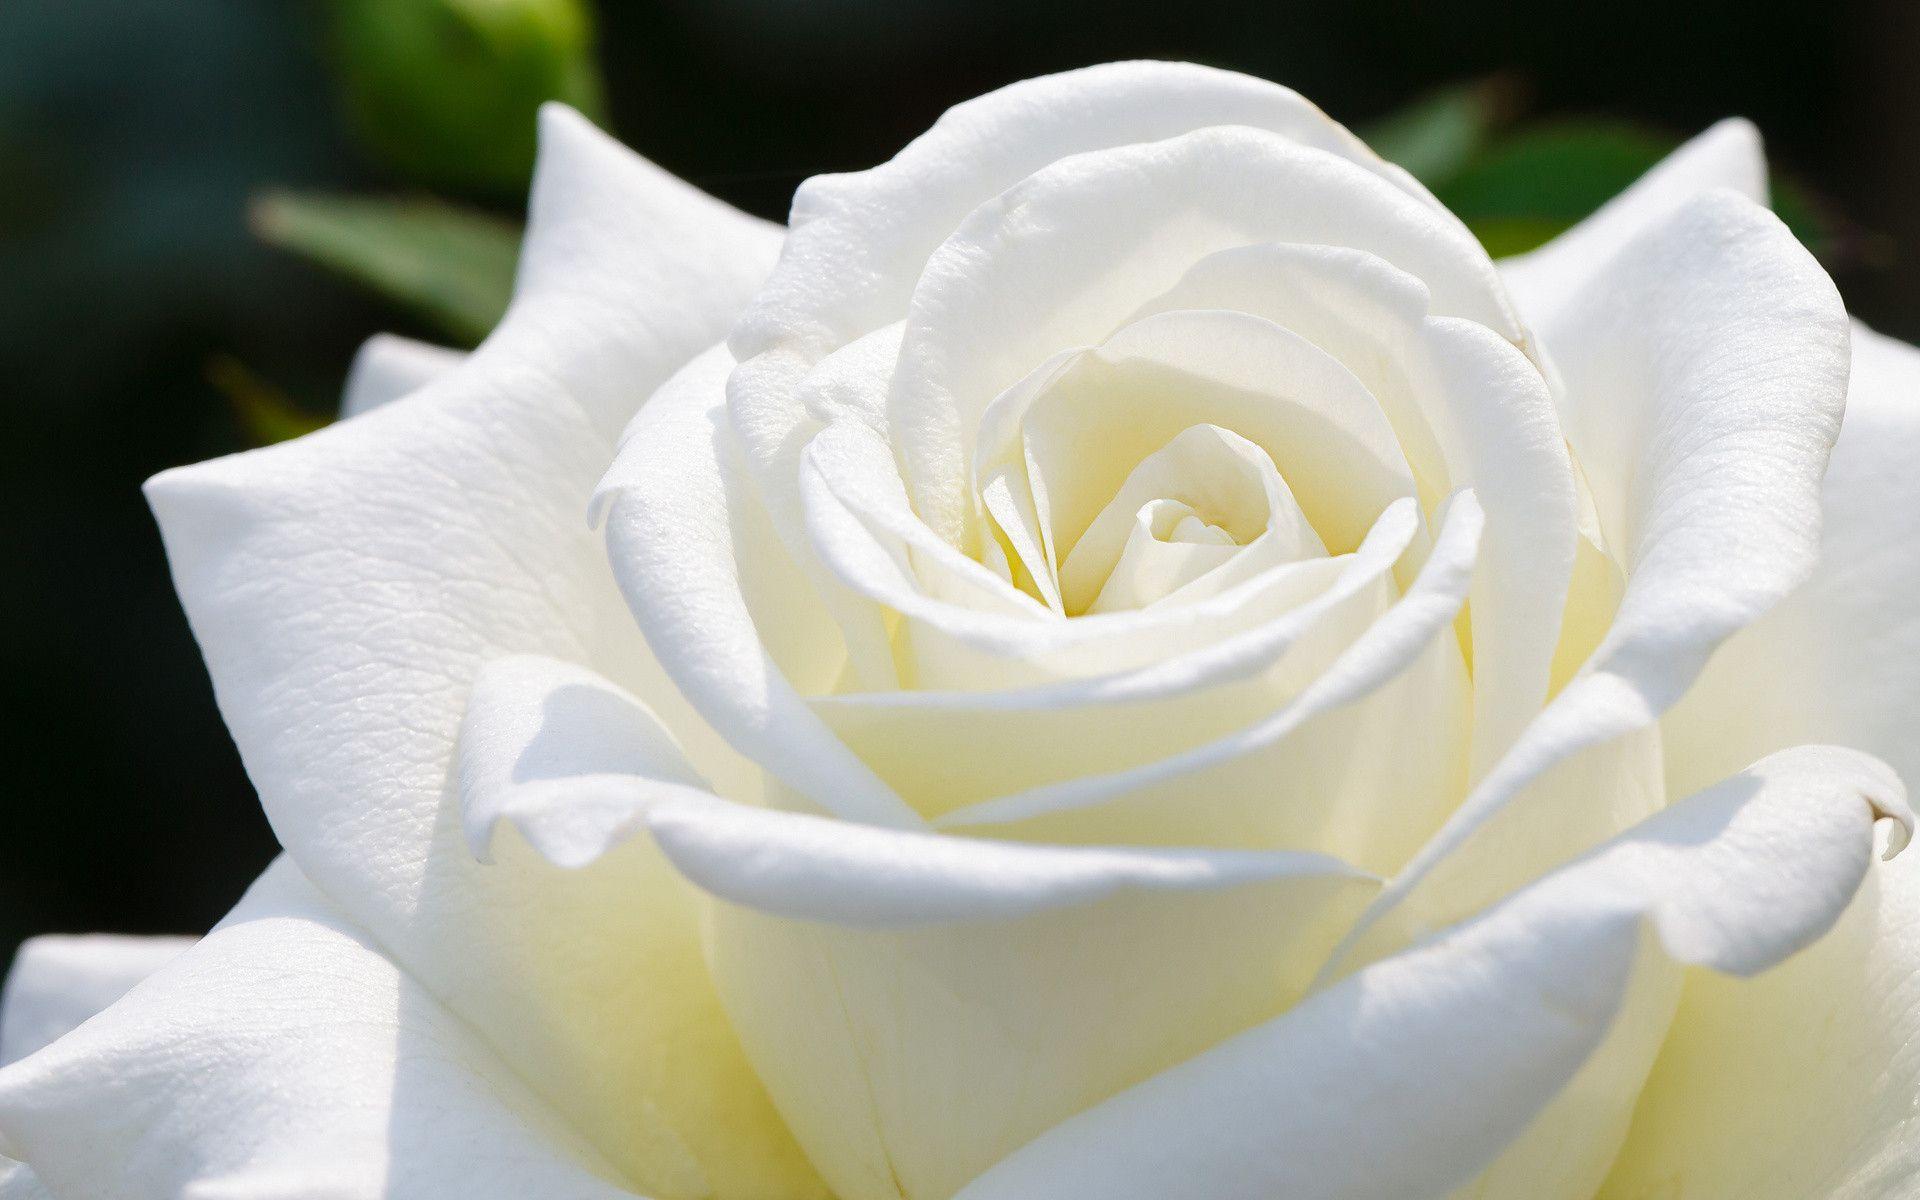 White Roses Wallpapers - Wallpaper Cave